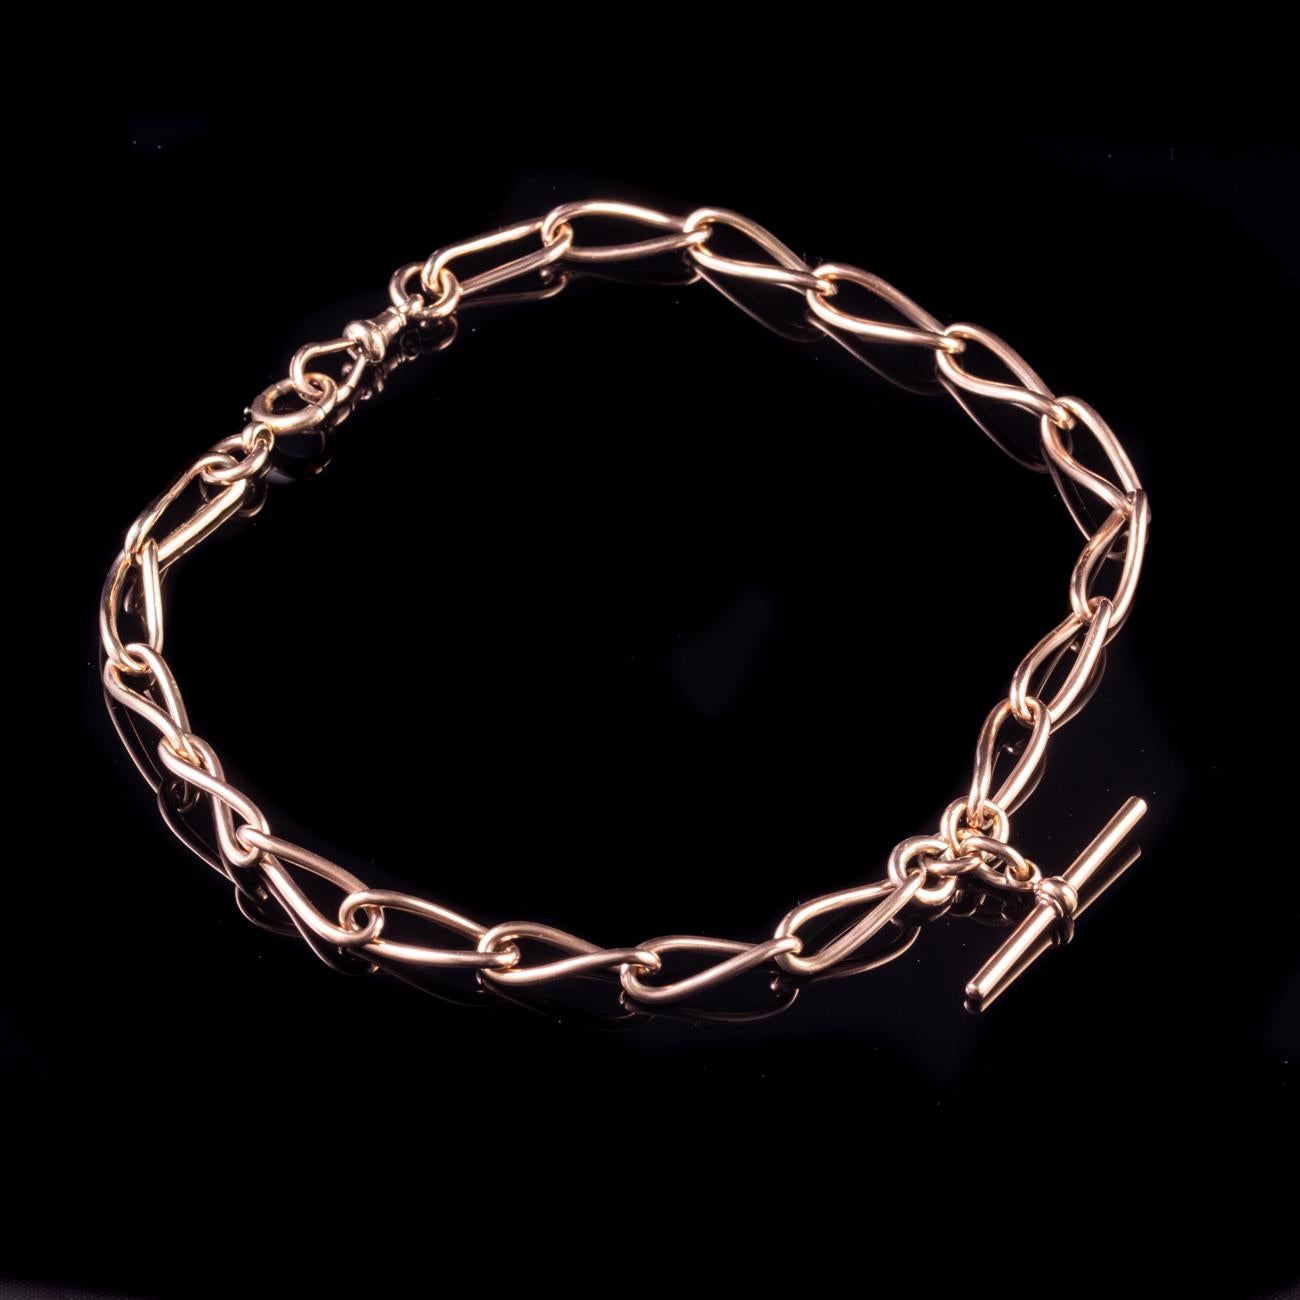 Antique Victorian Albert Chain 9 Carat Rose Gold Link Necklace, circa 1900 For Sale 2